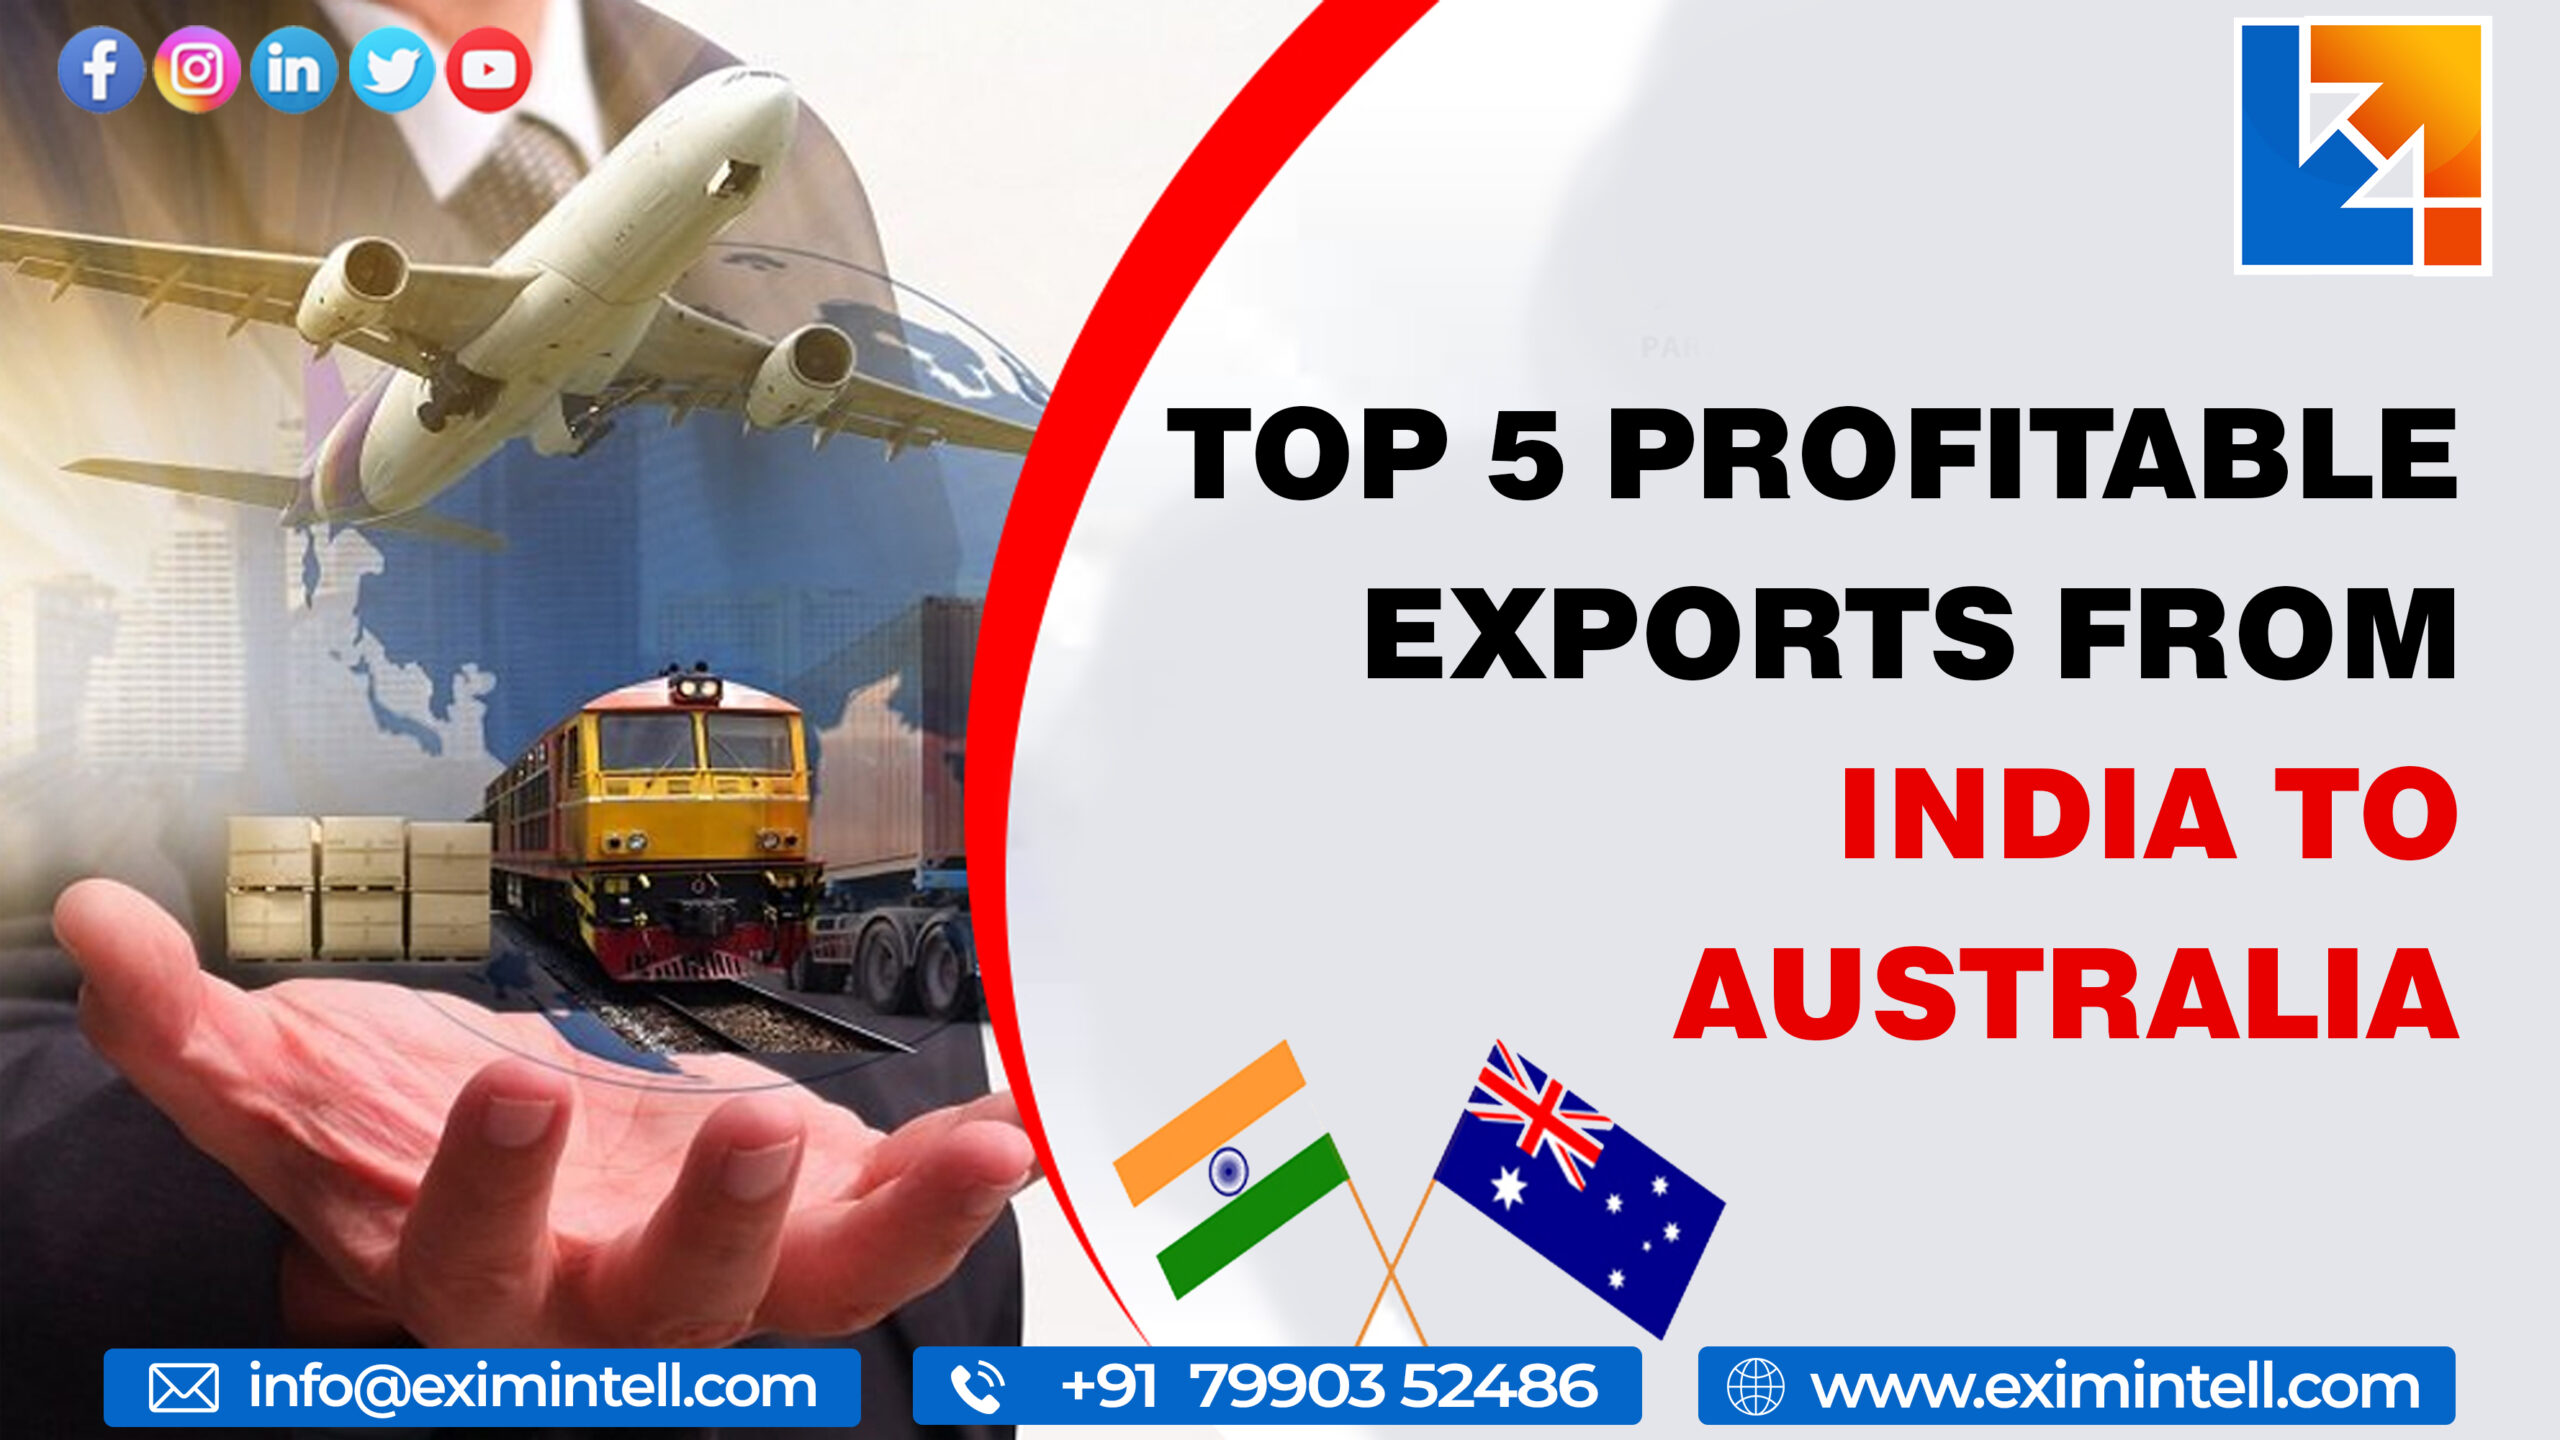 Top 5 Profitable Exports From India to Australia